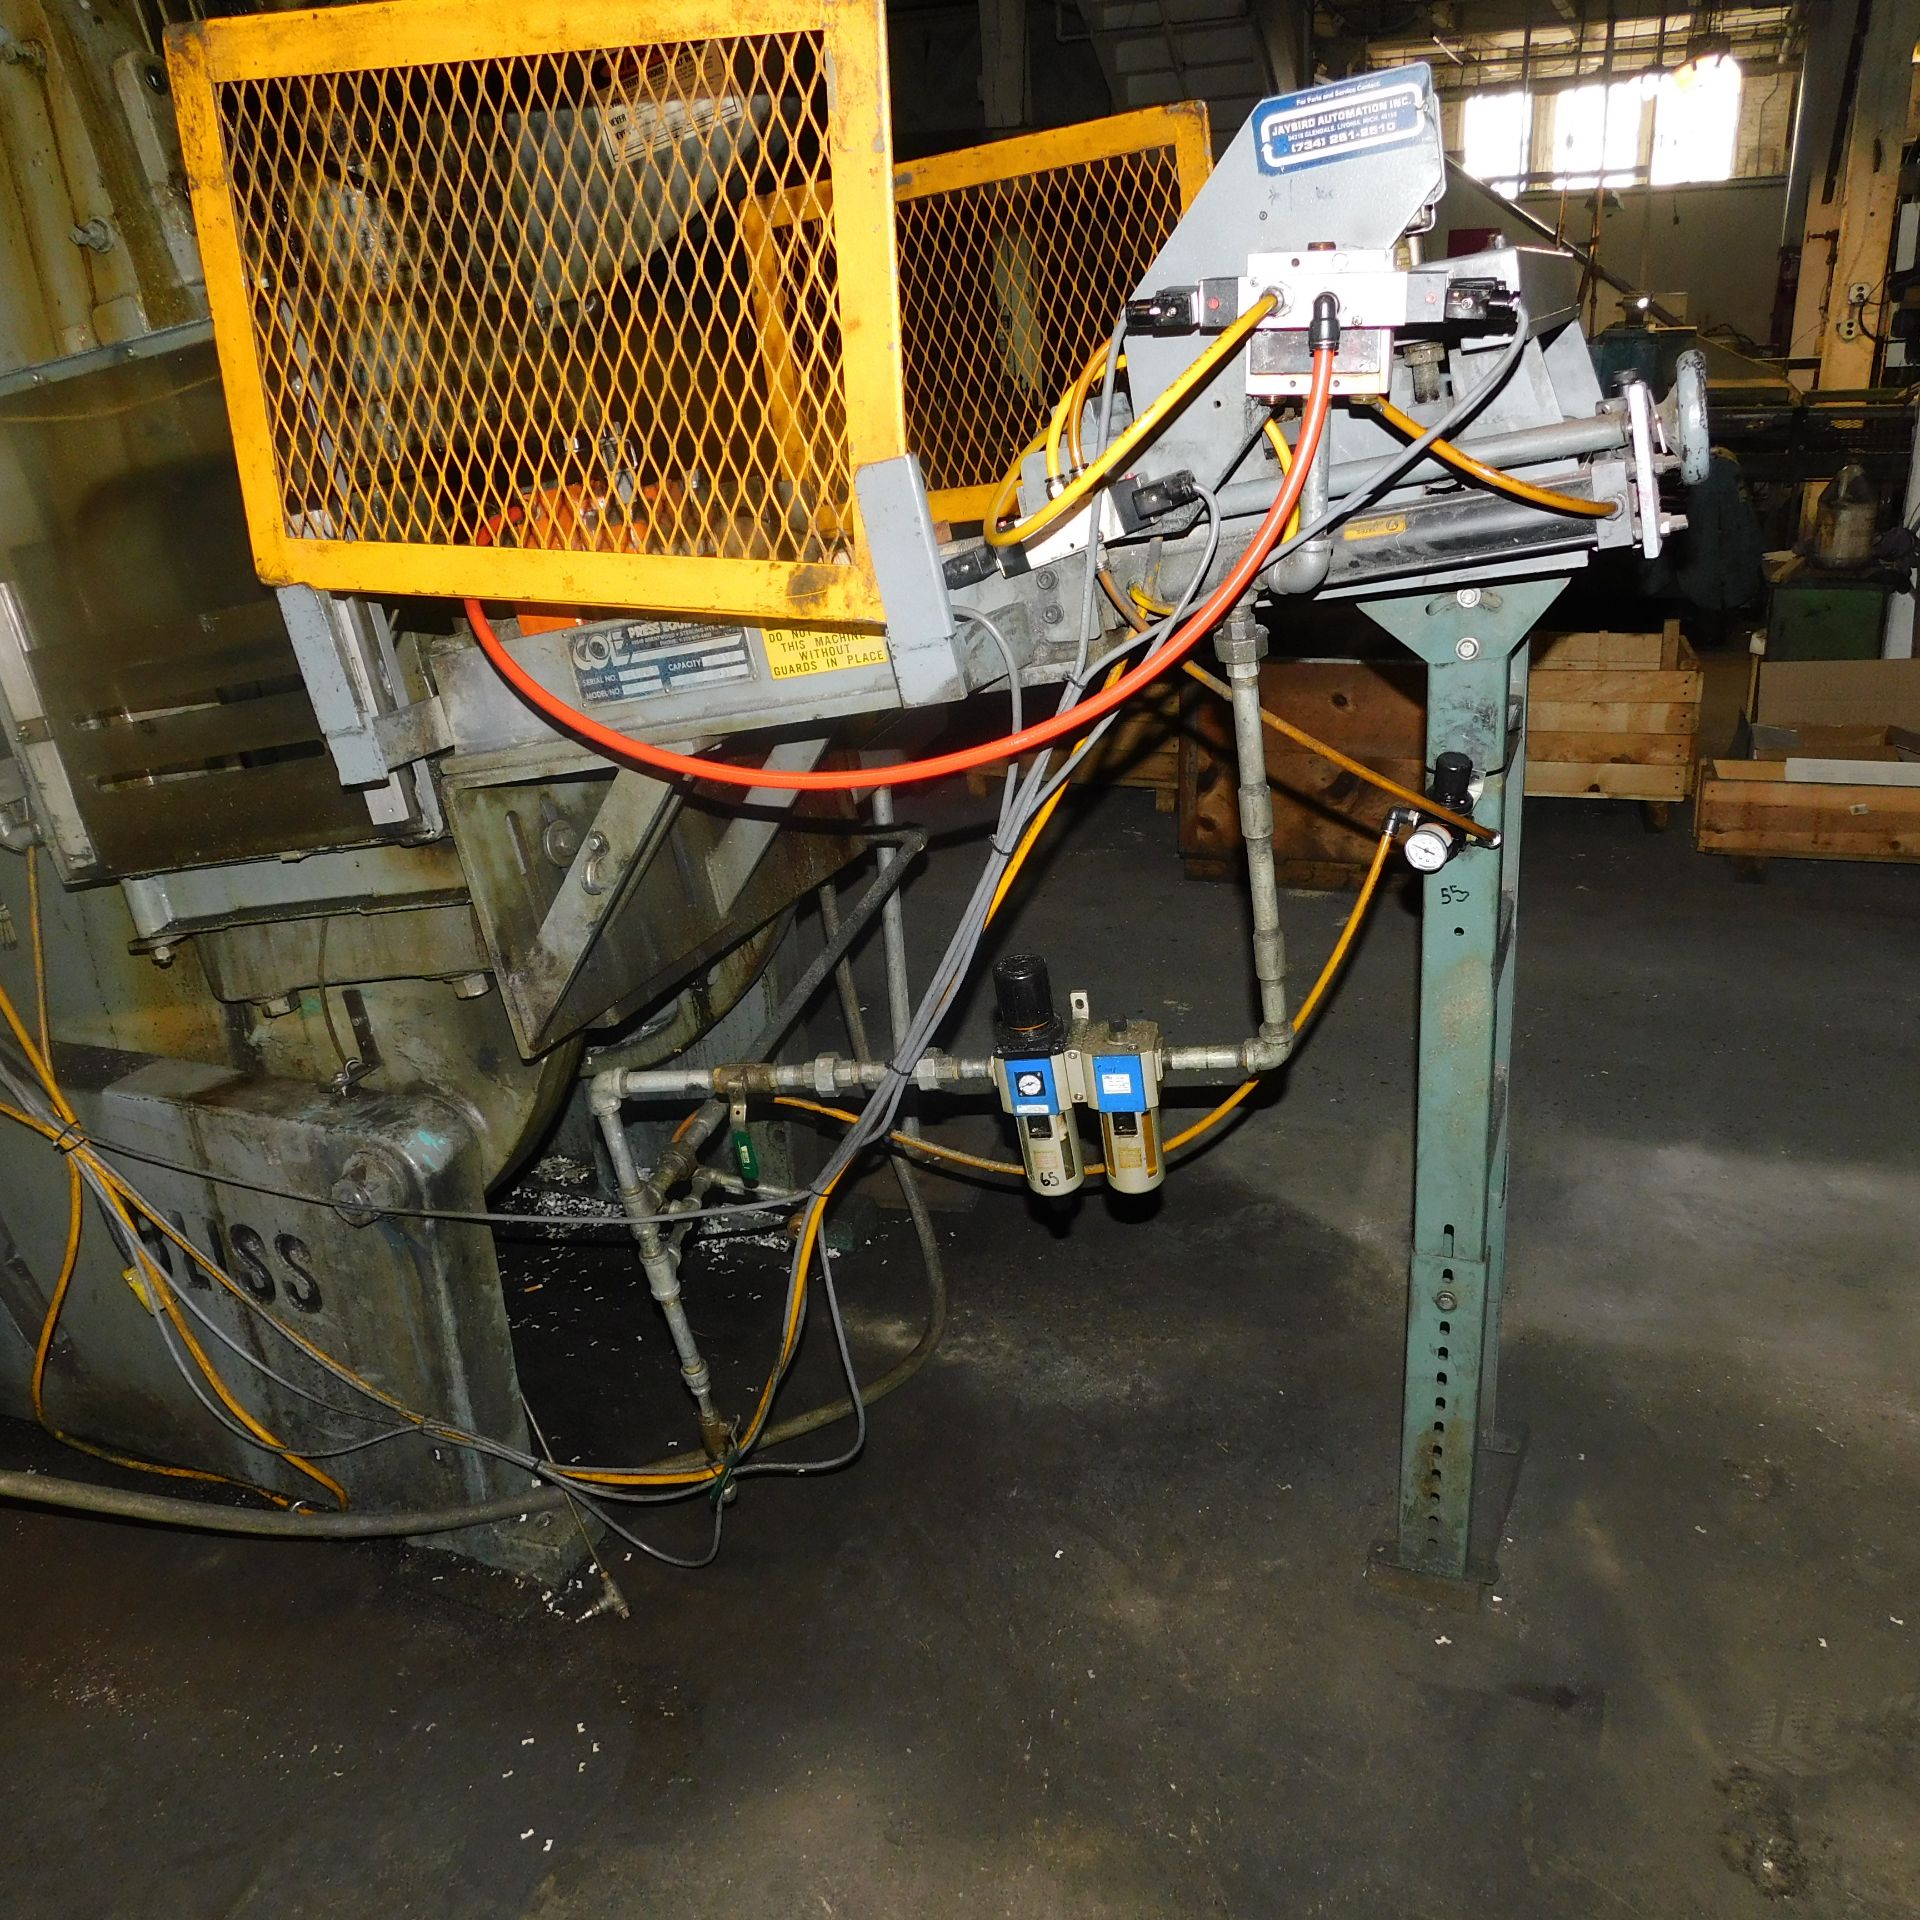 Bliss C-60 OBI Punch Press, s/n HP43742, New 1966, 60 Ton, 6" Stroke, 3" Adjustment, Air Clutch - Image 8 of 9